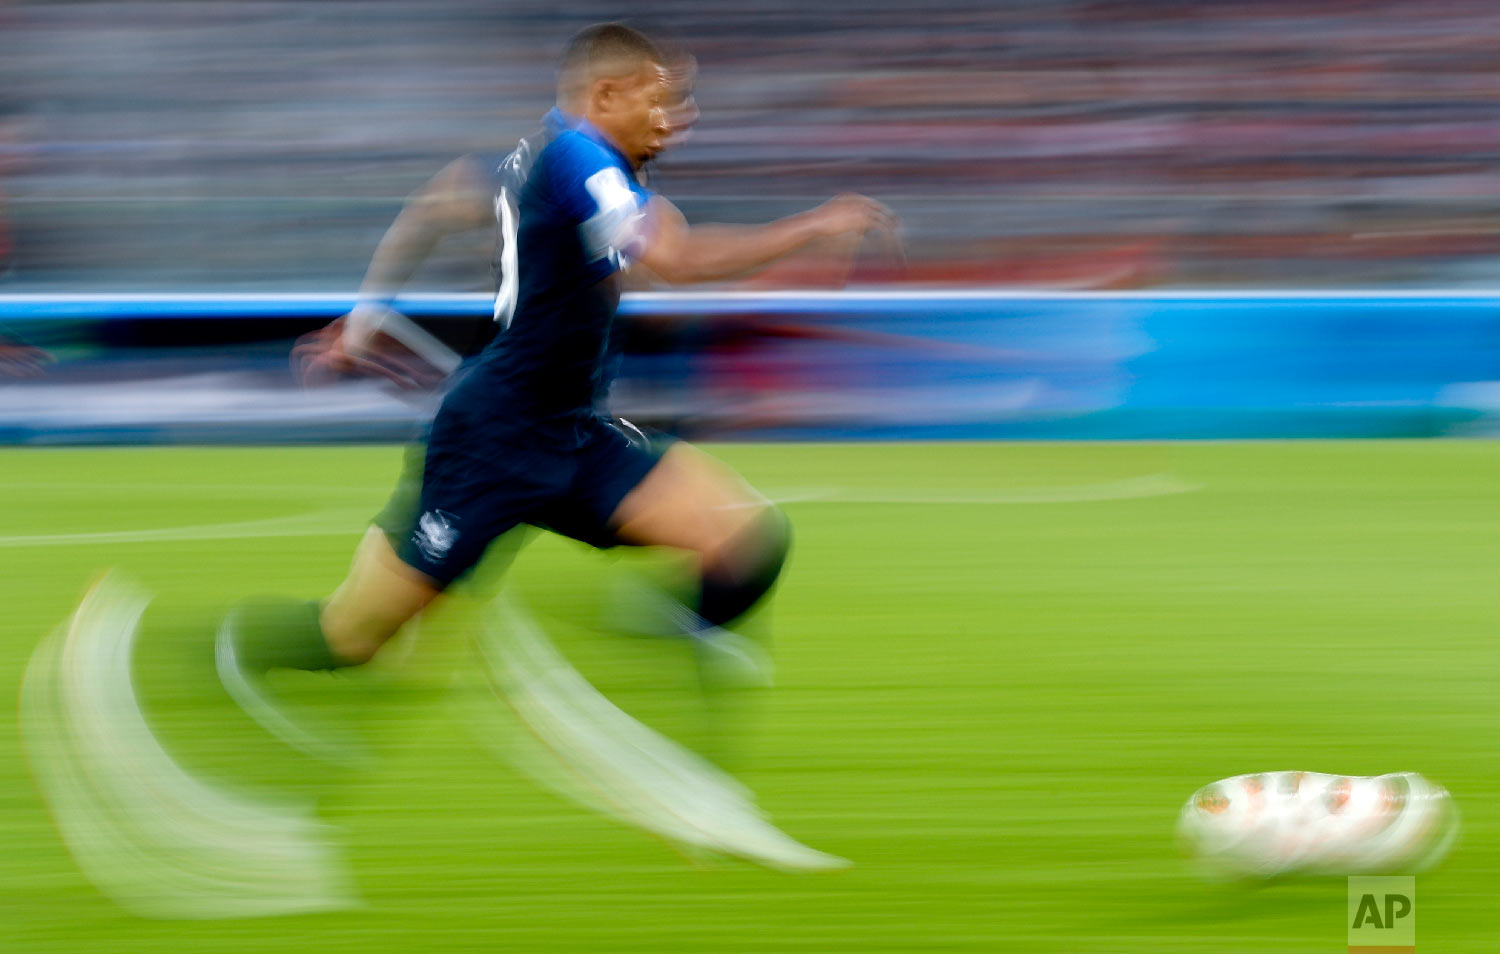  France's Kylian Mbappe runs with the ball during the semifinal match between France and Belgium at the 2018 soccer World Cup in the St. Petersburg Stadium, in St. Petersburg, Russia, July 10, 2018. (AP Photo/Petr David Josek) 